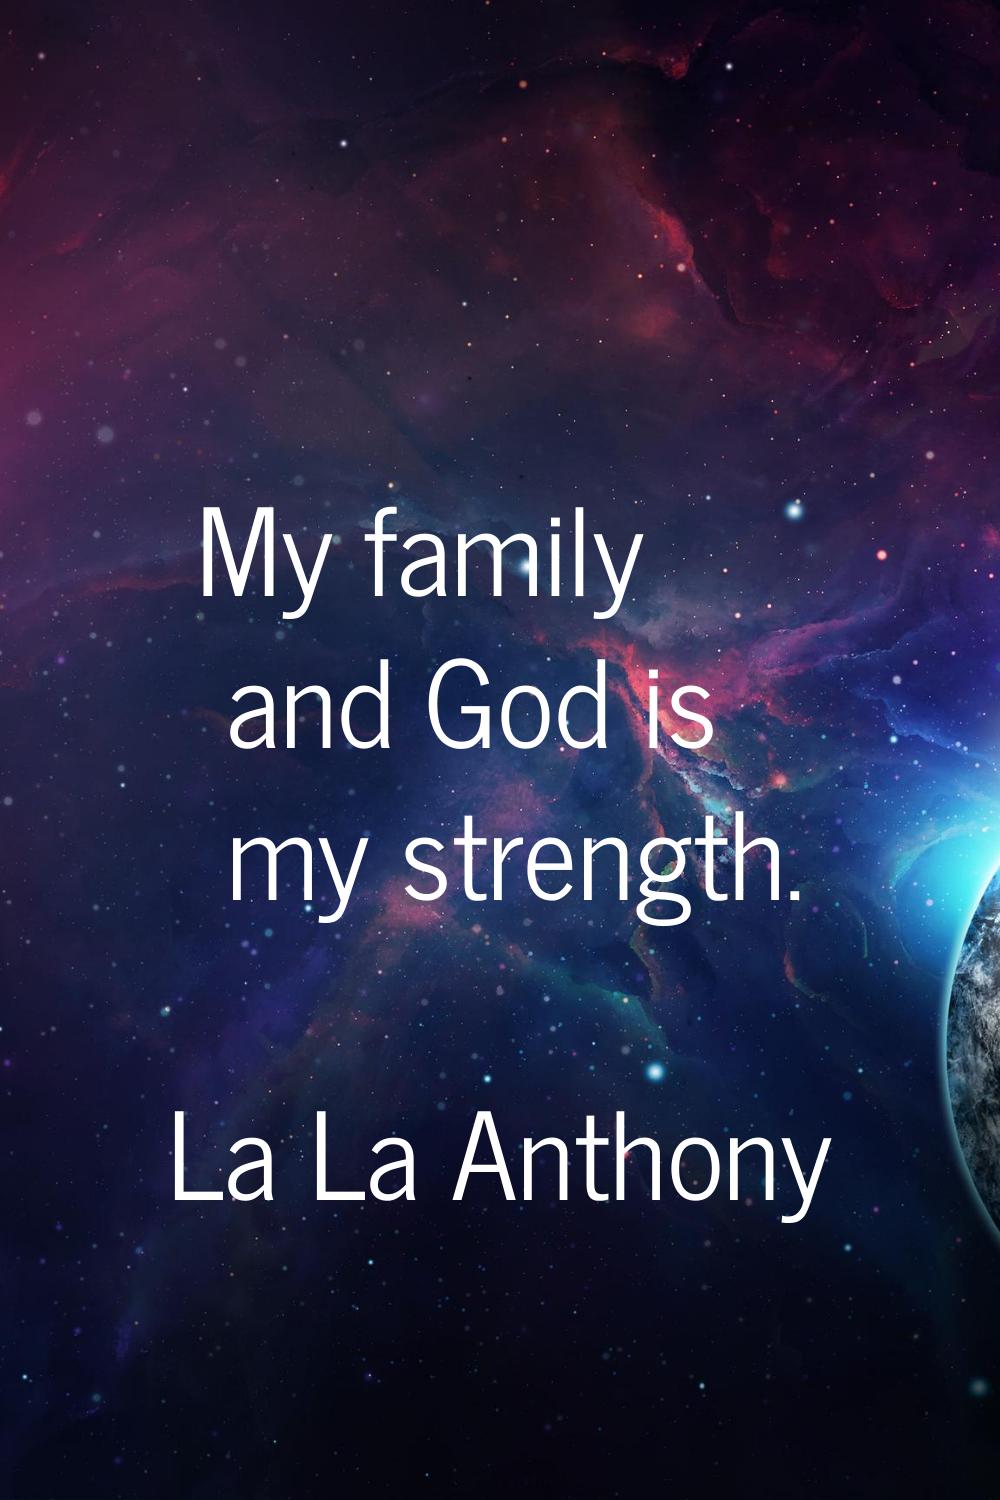 My family and God is my strength.